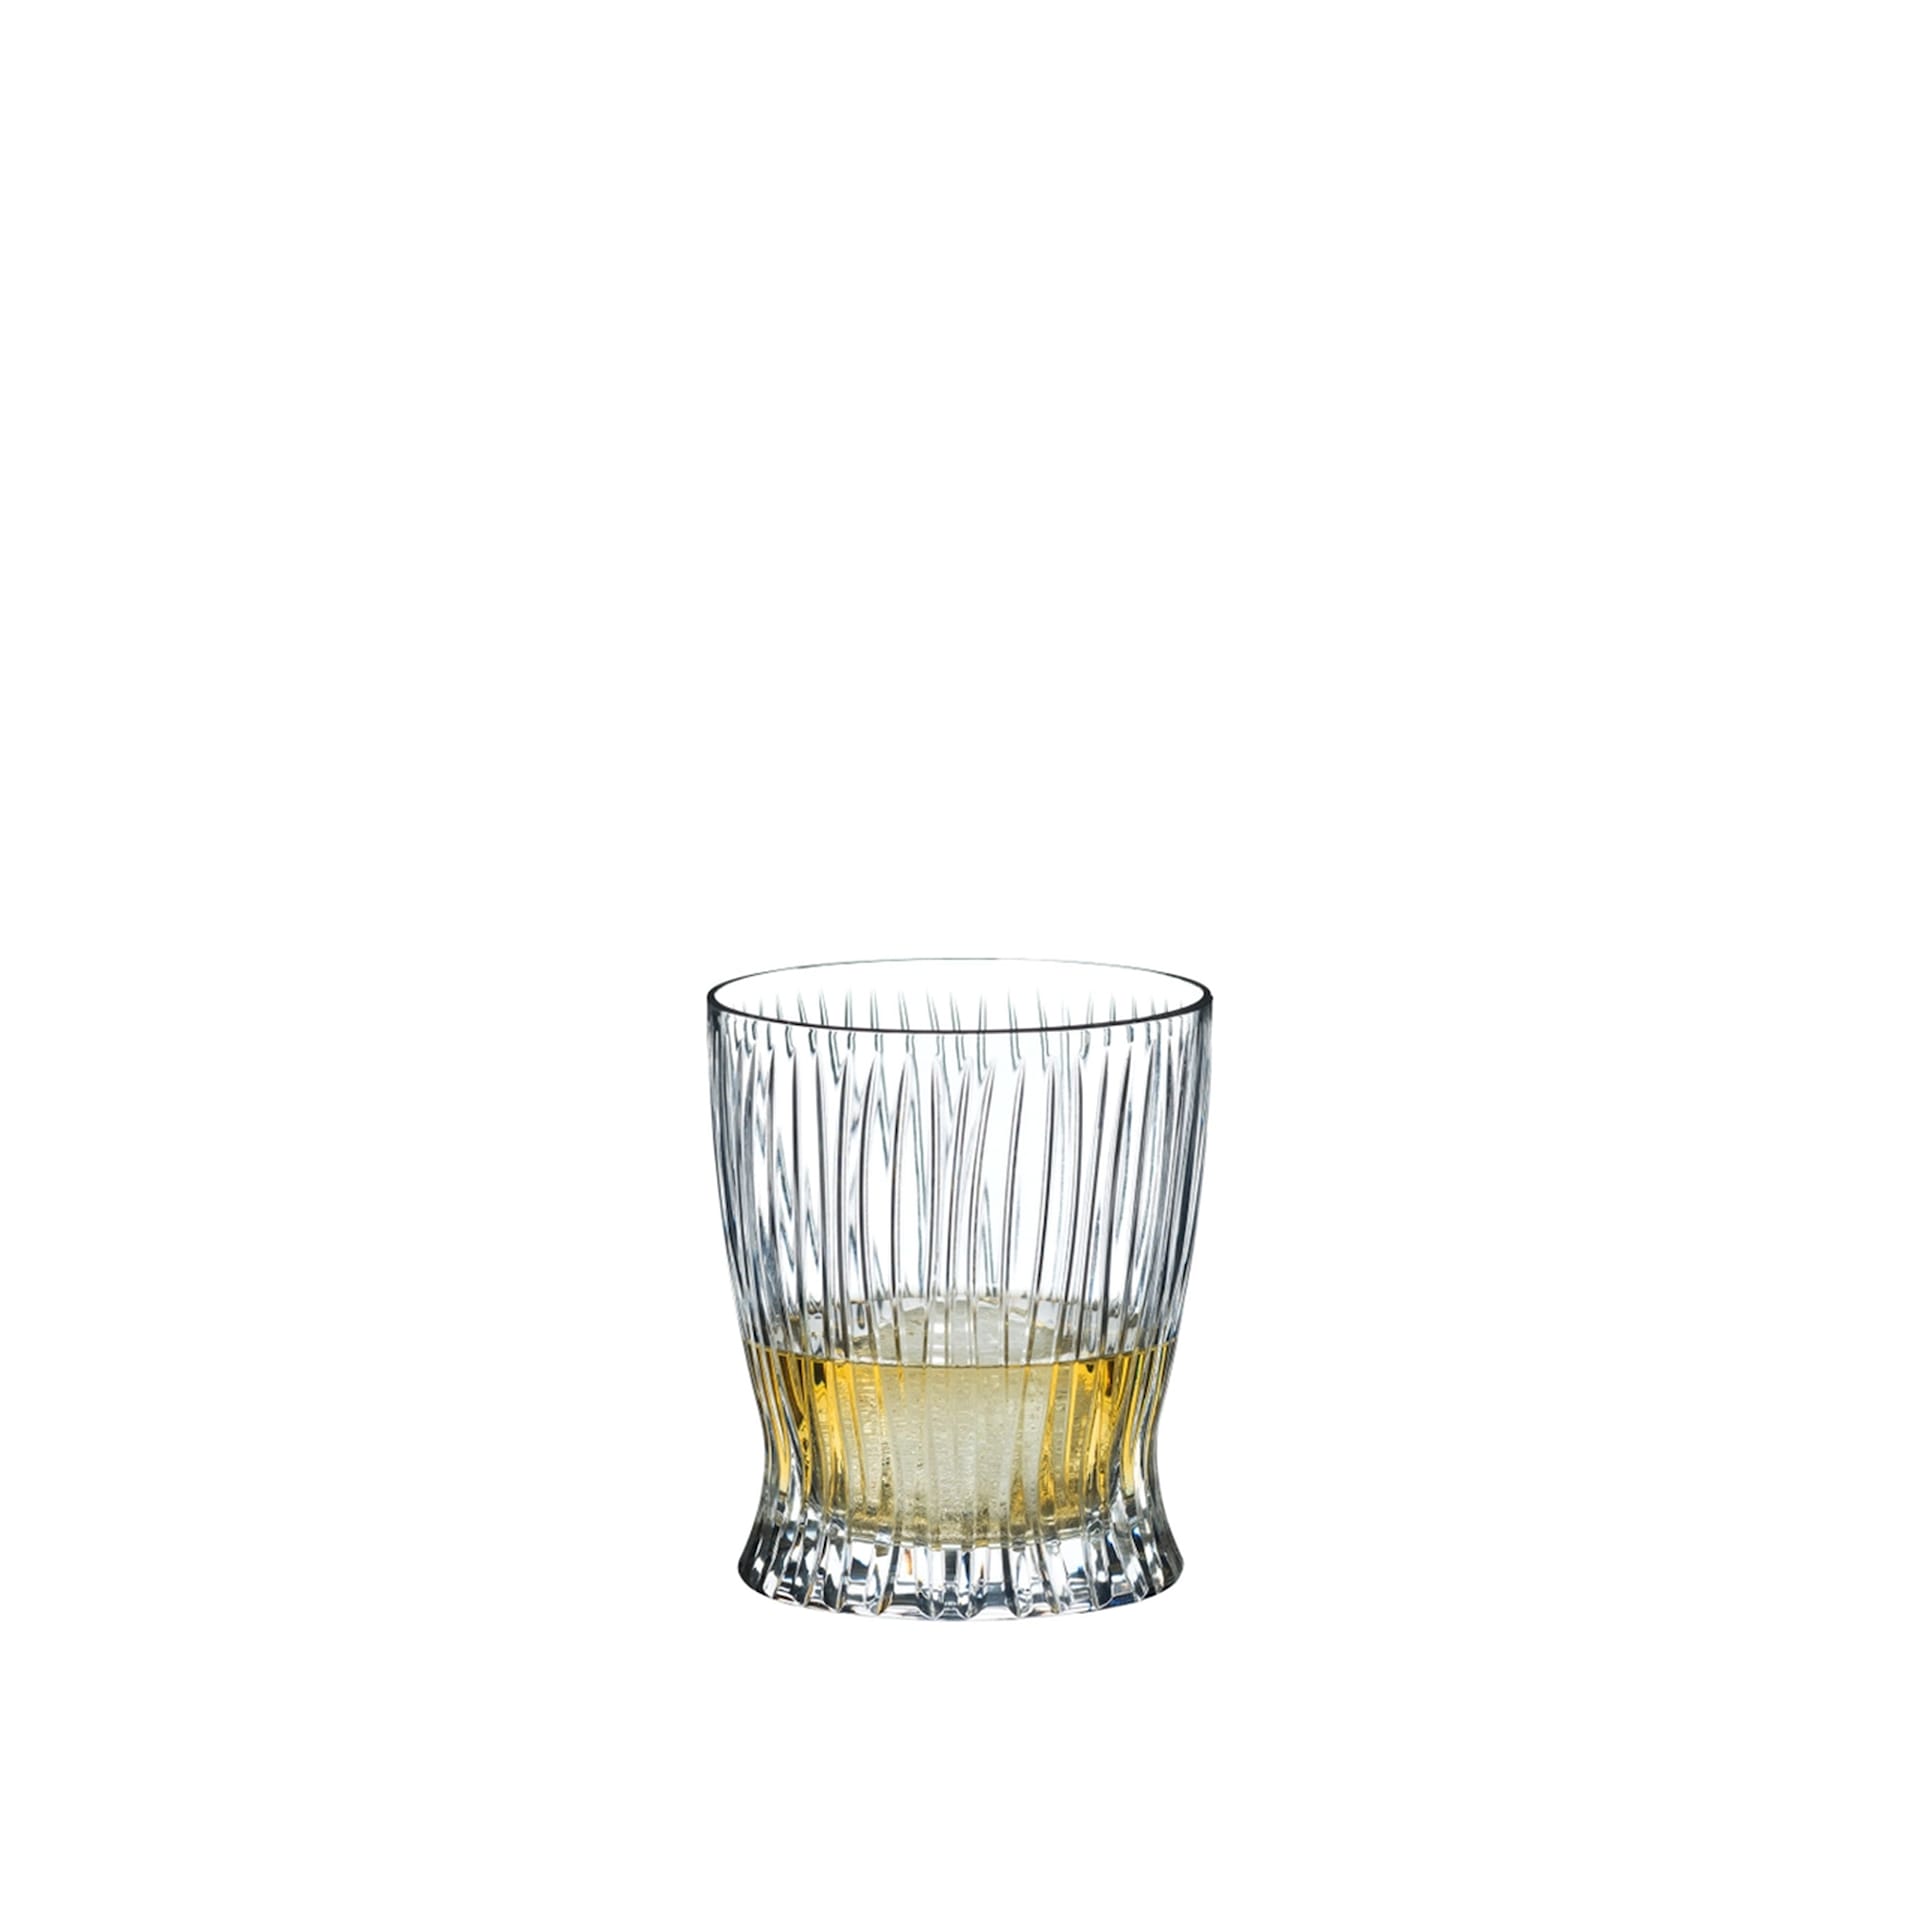 Riedel Tumbler Collection Whisky Fire, 2-Pack - Riedel - NO GA